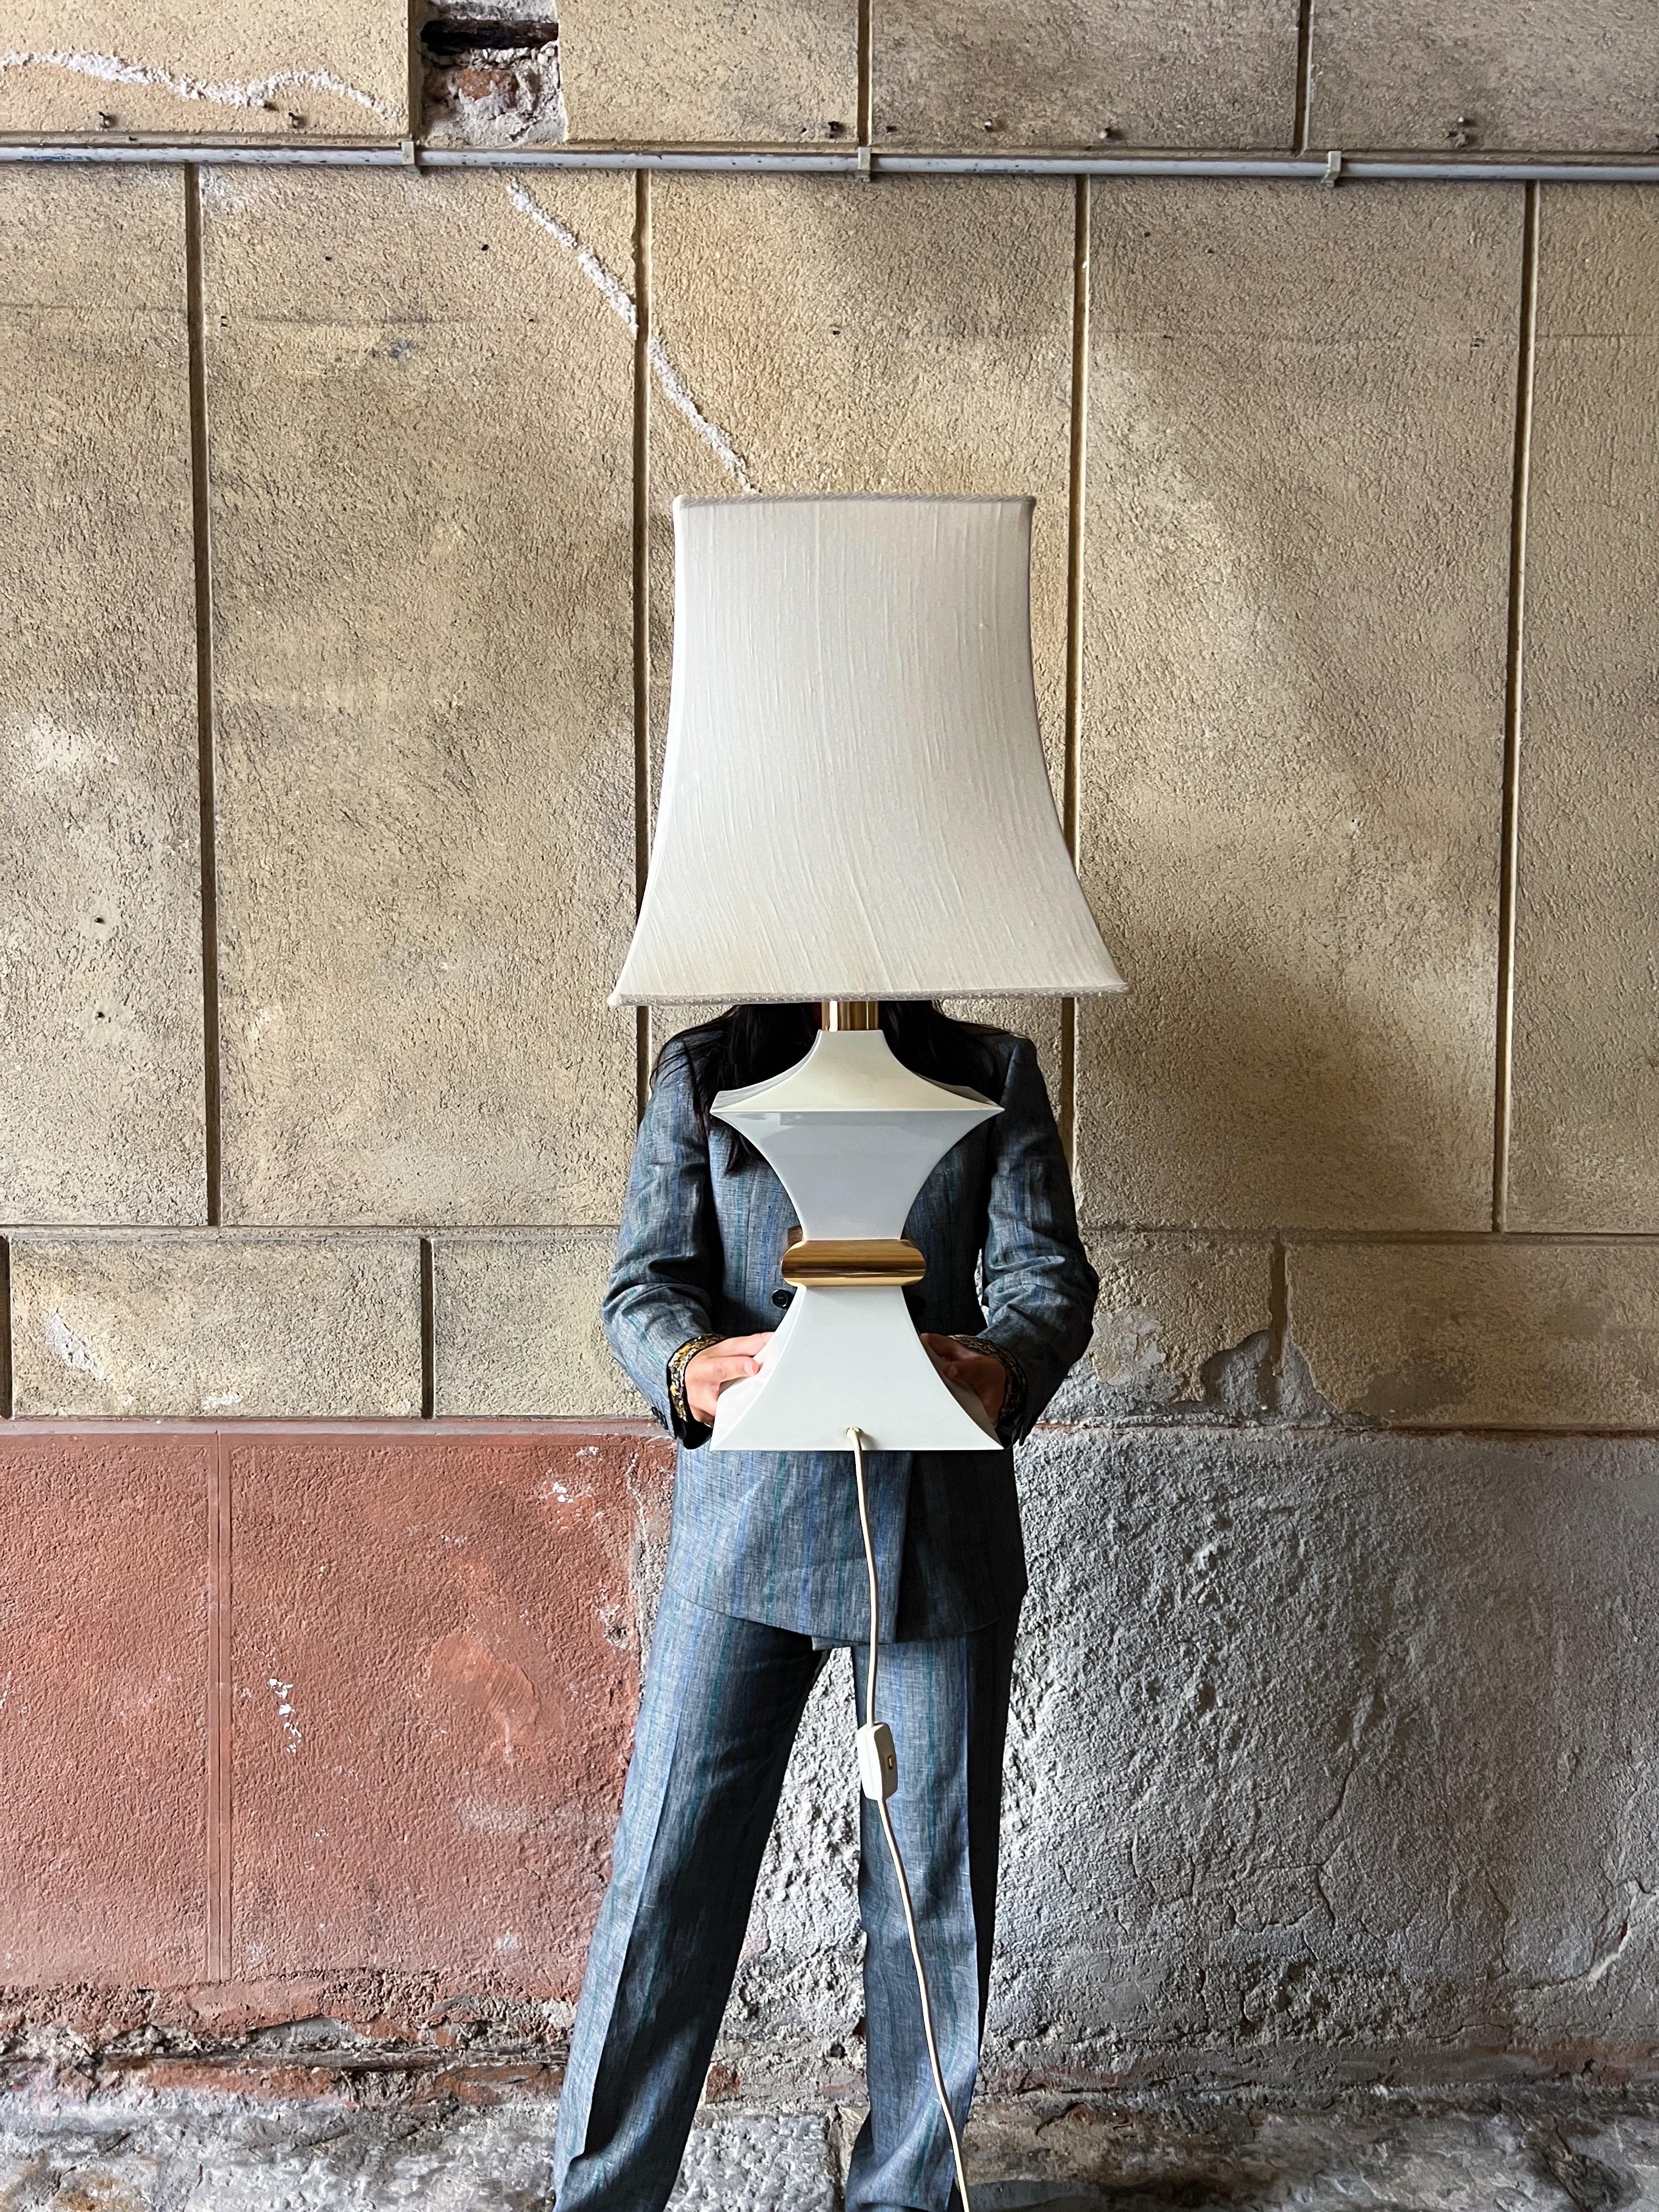 Exquisite large table lamp, crafted in Italy during the stylish 1970s, this lamp is a true testament to Italian design elegance.

Meticulously fashioned from cream-coated metal and adorned with a gleaming golden brass accent at the center. Its